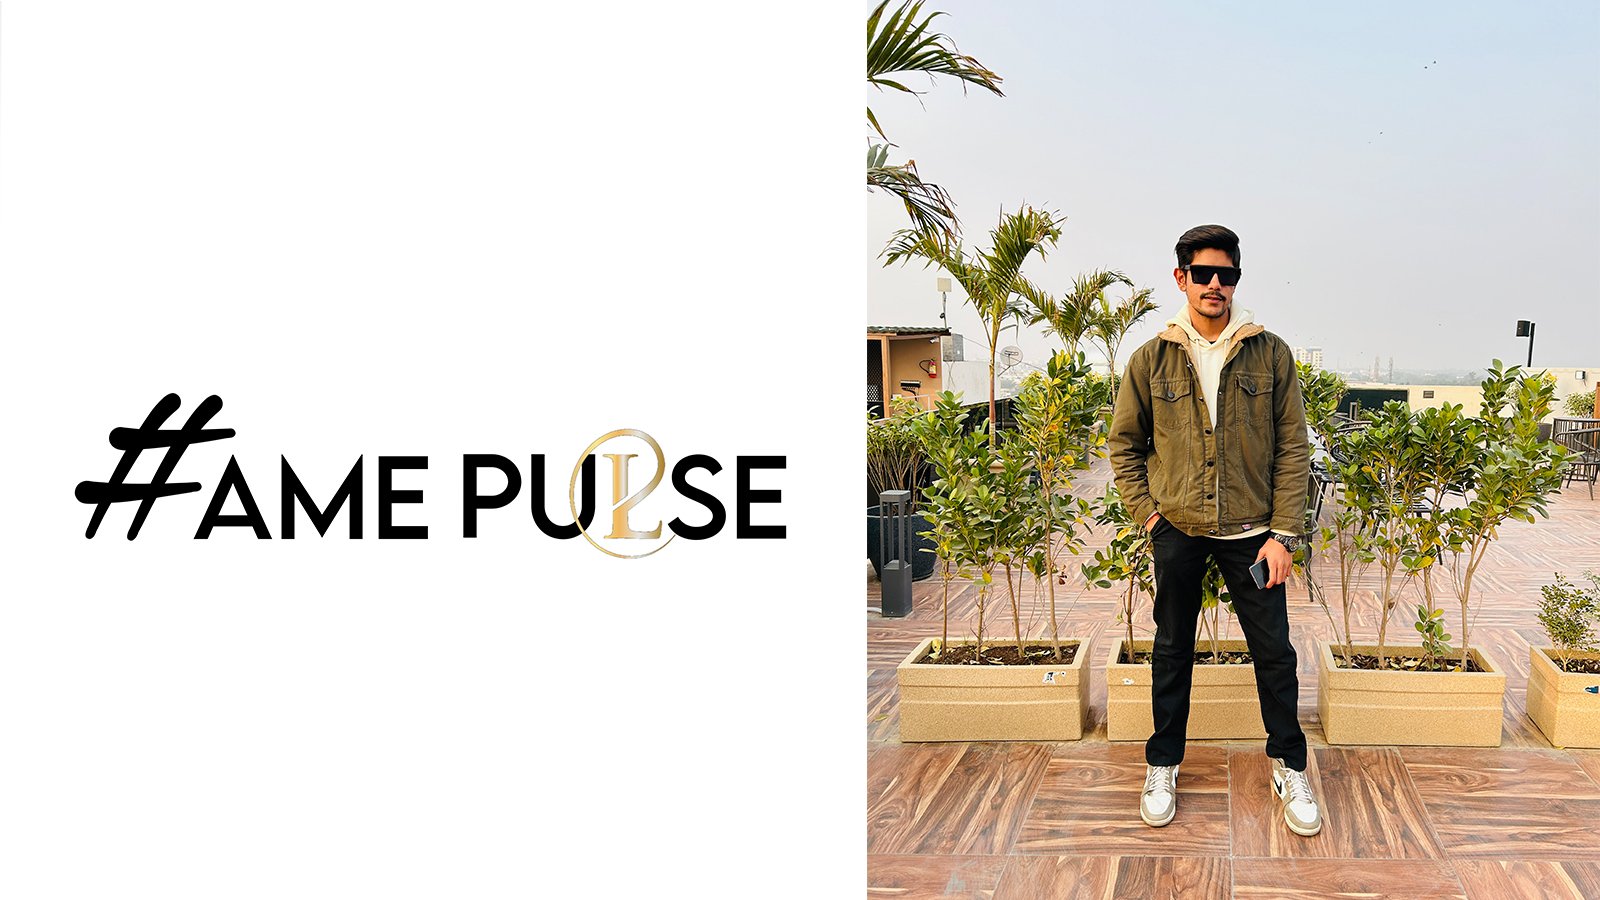 FAME PULSE, a 360-Degree Media & Marketing Agency, Prepares for Launch under Founder Ronit Raj